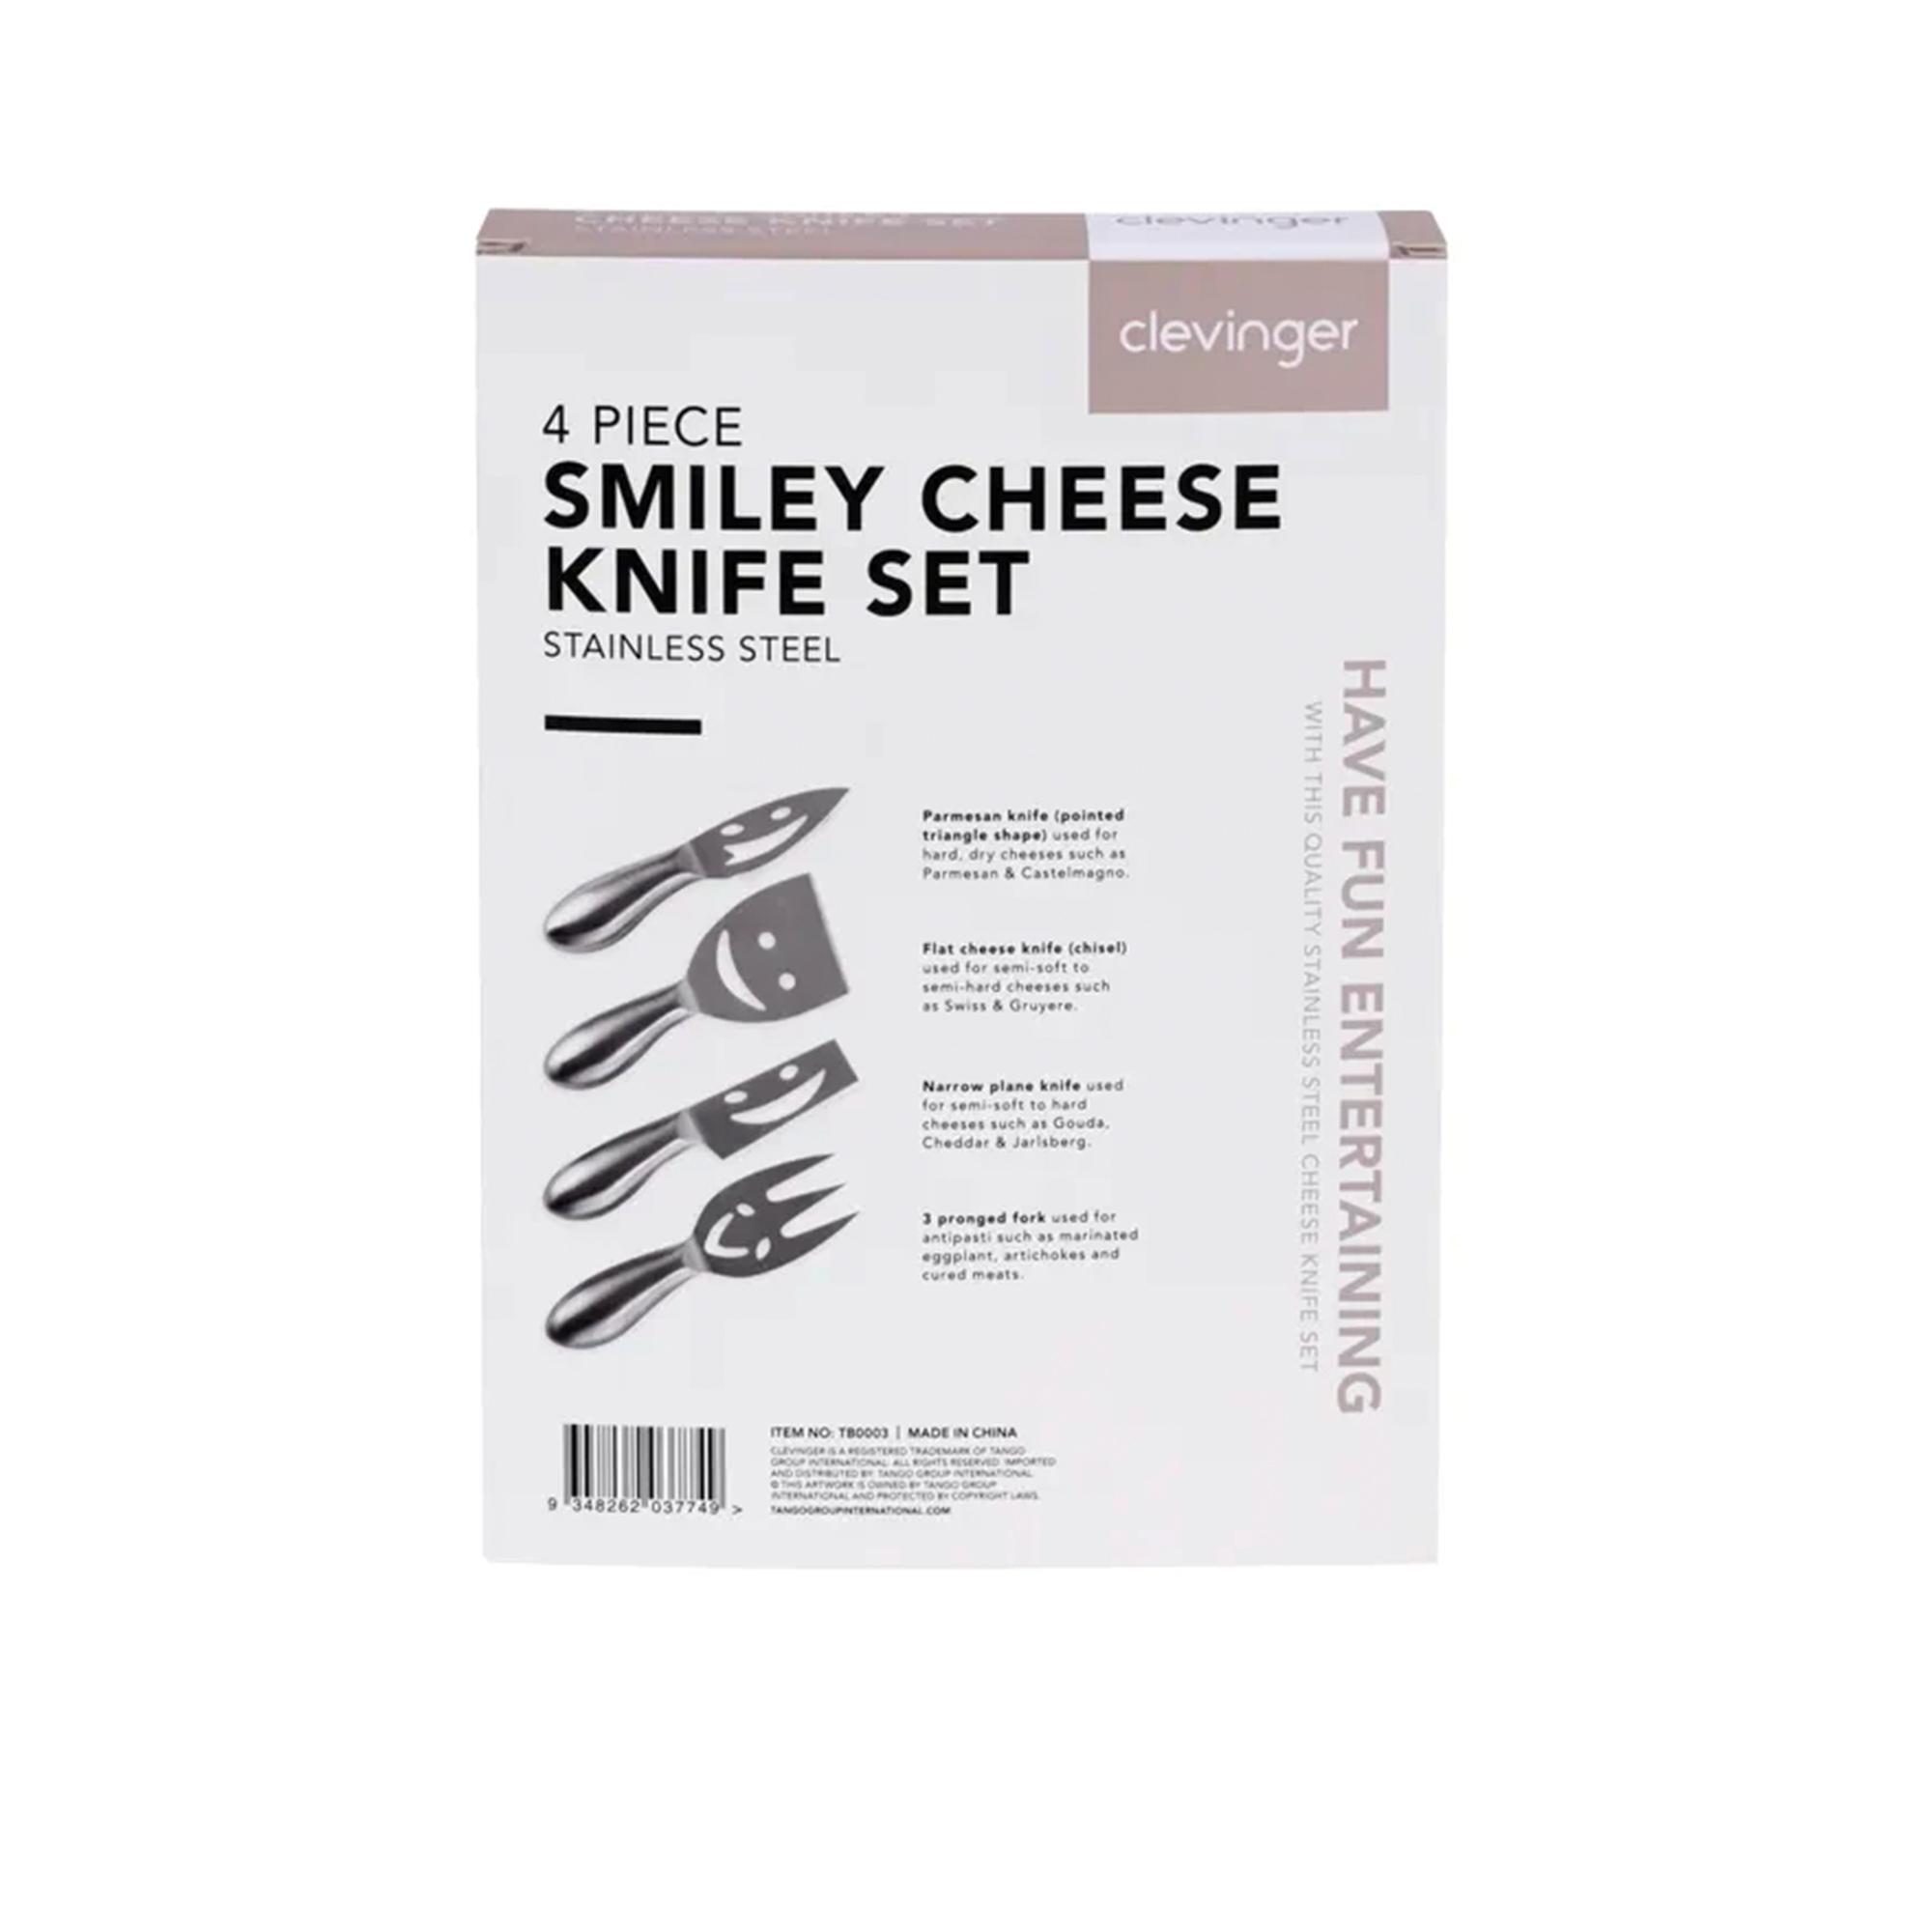 Clevinger Stainless Steel Merrivale Smiley Cheese Knife Set Set of 4 Image 5